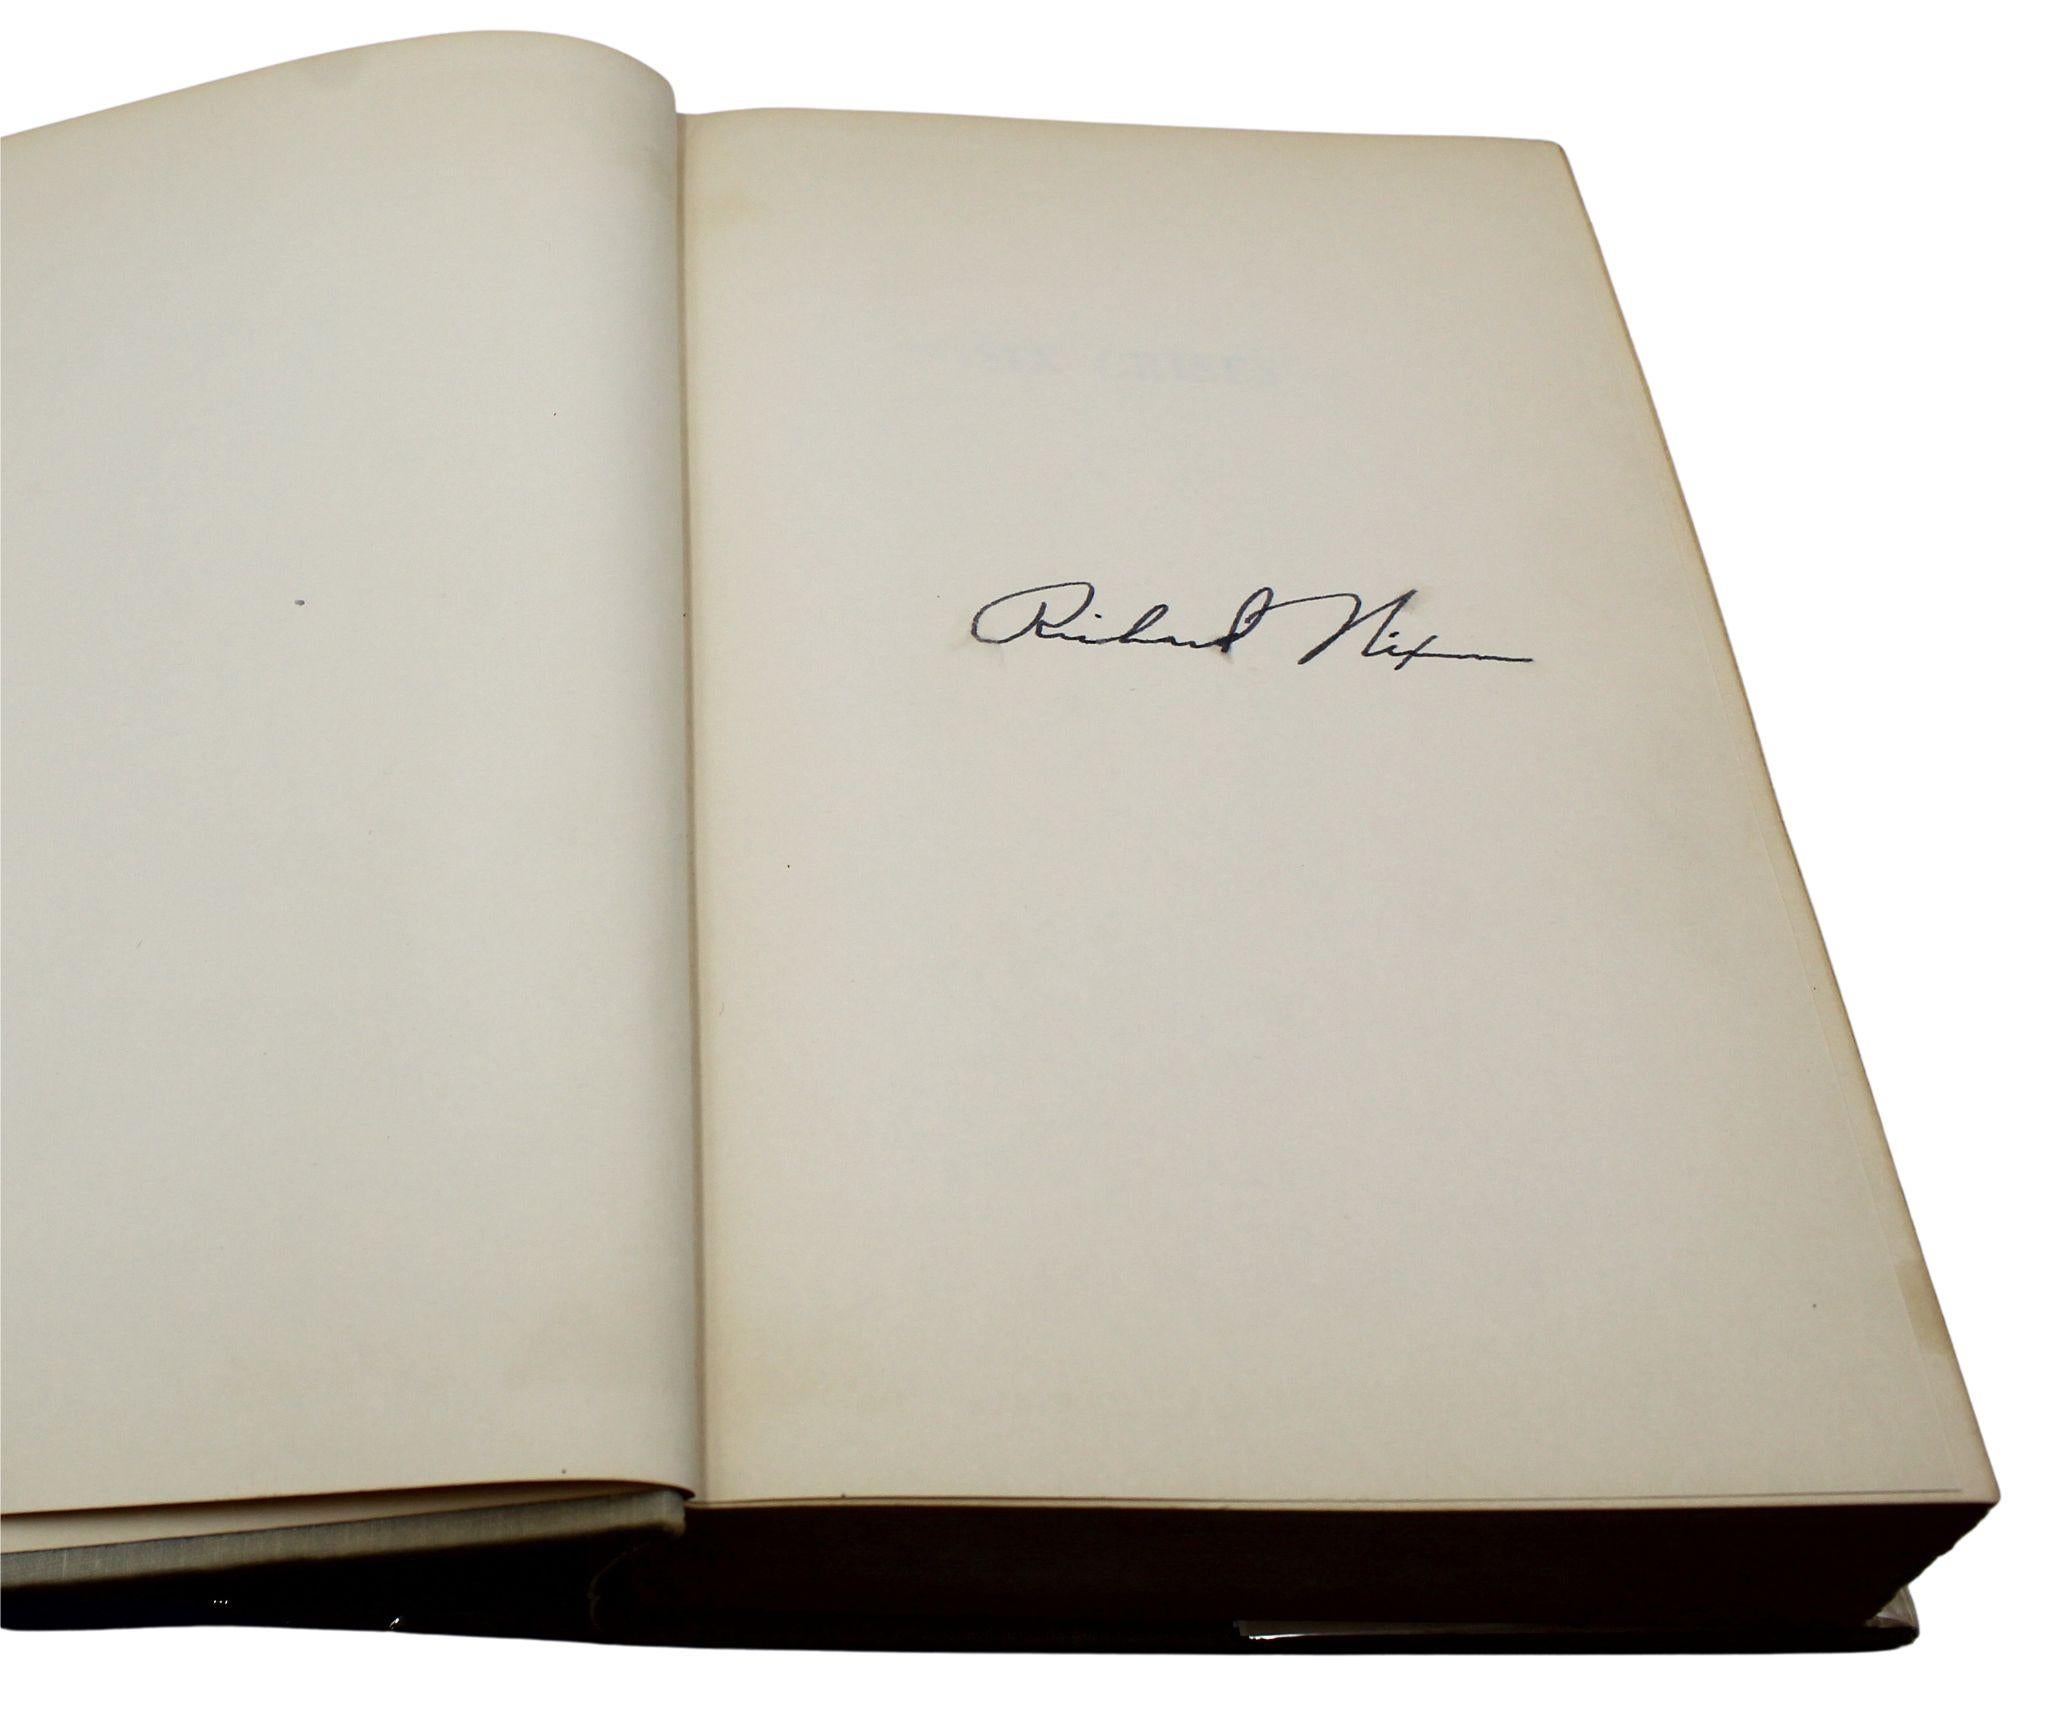 Six Crises, Signed by Richard Nixon, First Edition, 1962 For Sale 2